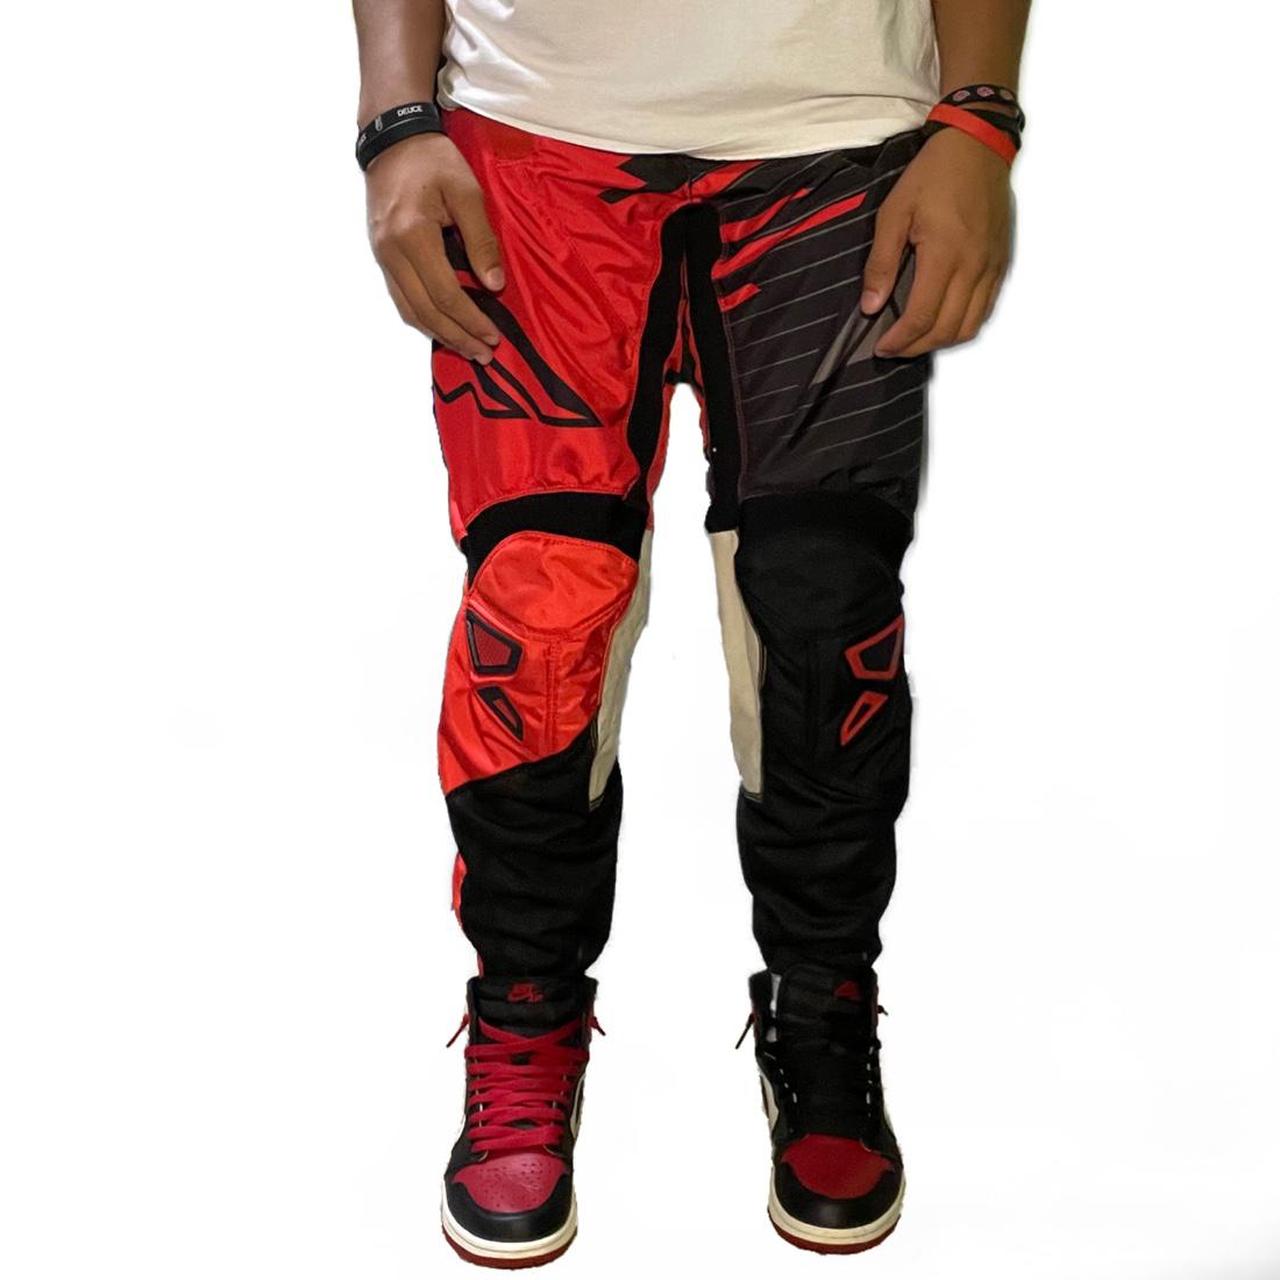 Product Image 2 - Motorsport pants ❤️‍🔥🏎

-Size 32” and